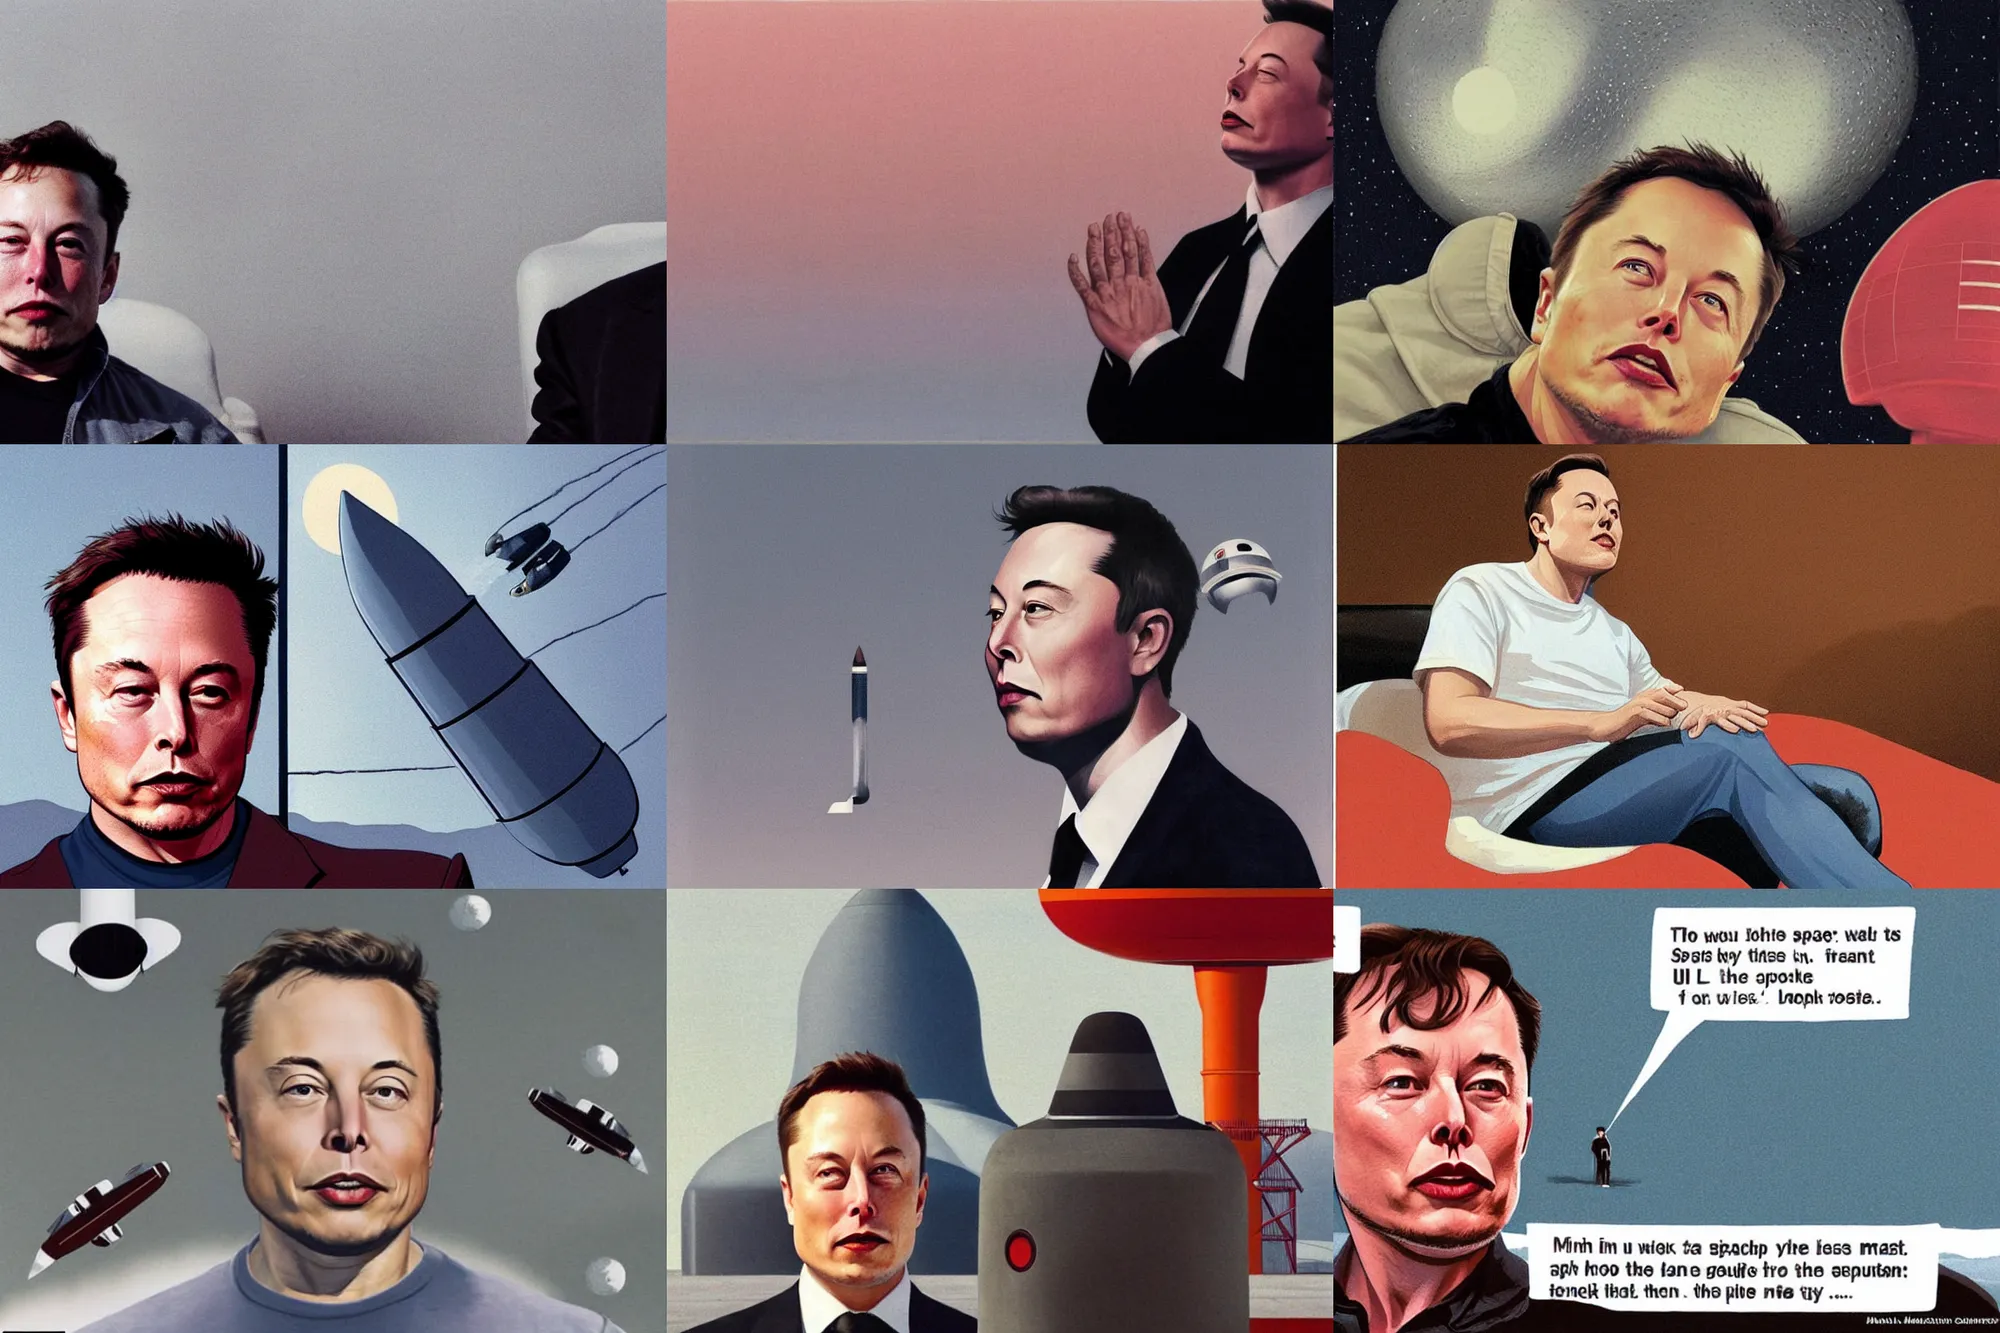 Prompt: Elon Musk with closed eyes thinking about launching space ships, retro rockets, Quint Buchholz